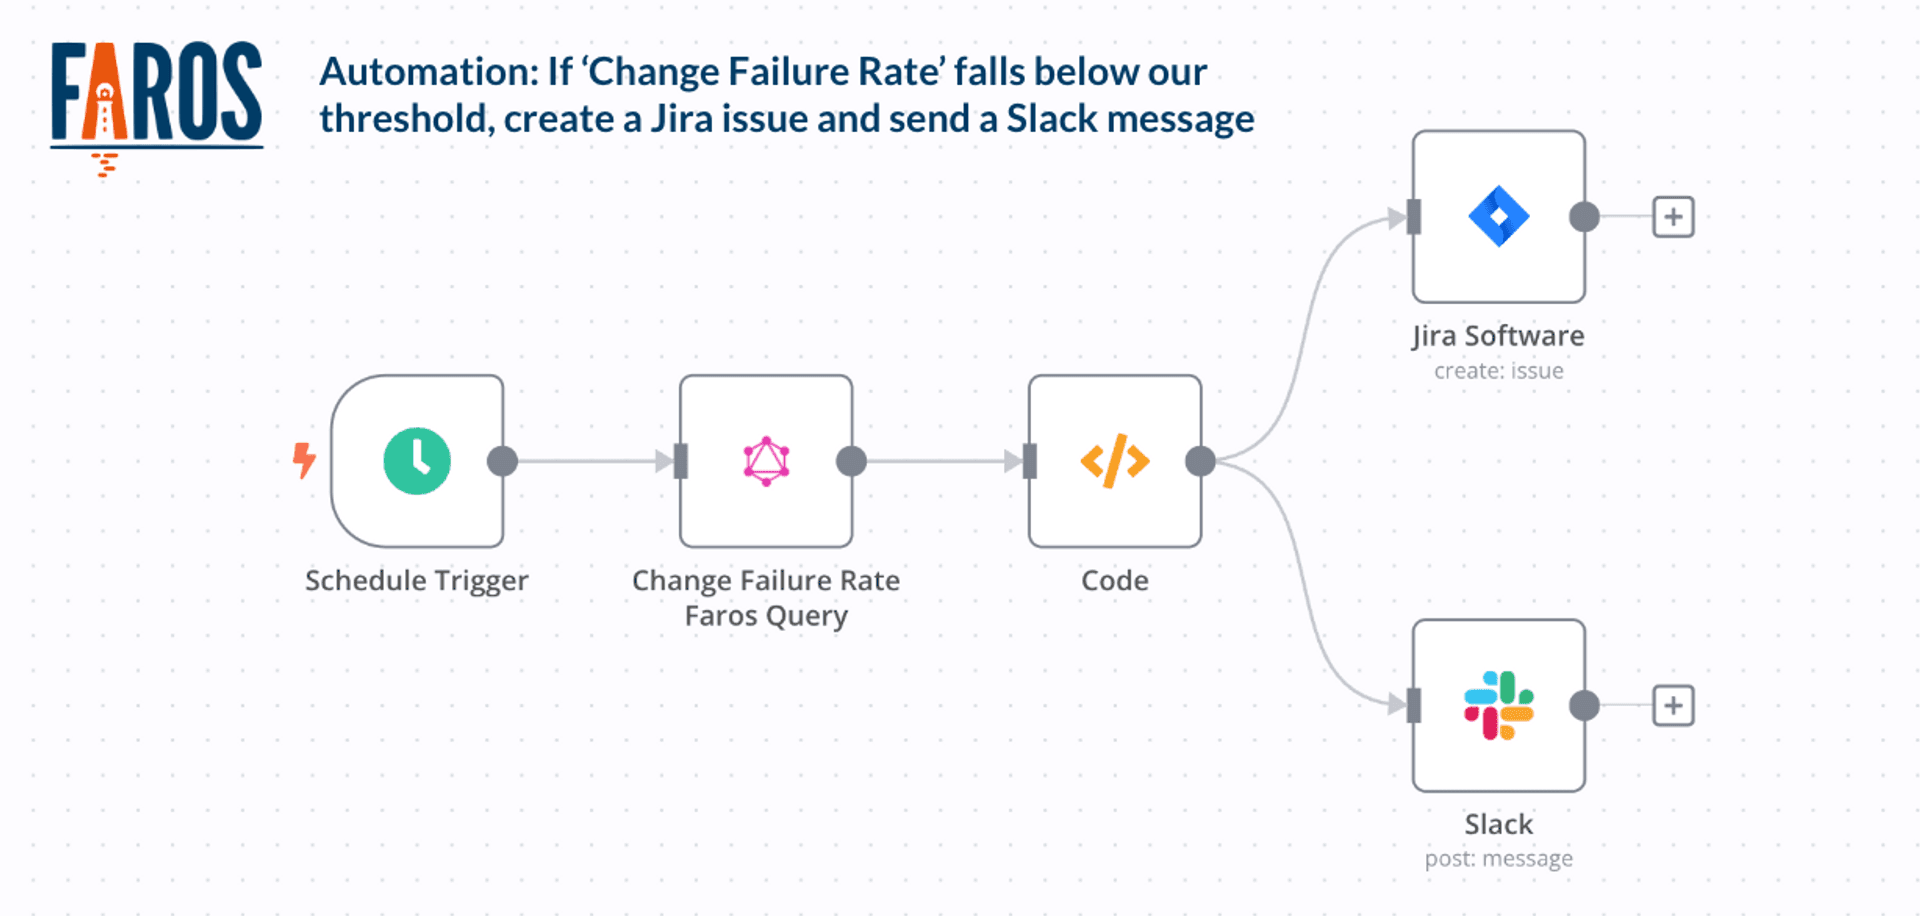 Workflow of a Faros AI automation, where a trigger based on Change Failure Rate creates a Jira issue and sends a Slack message